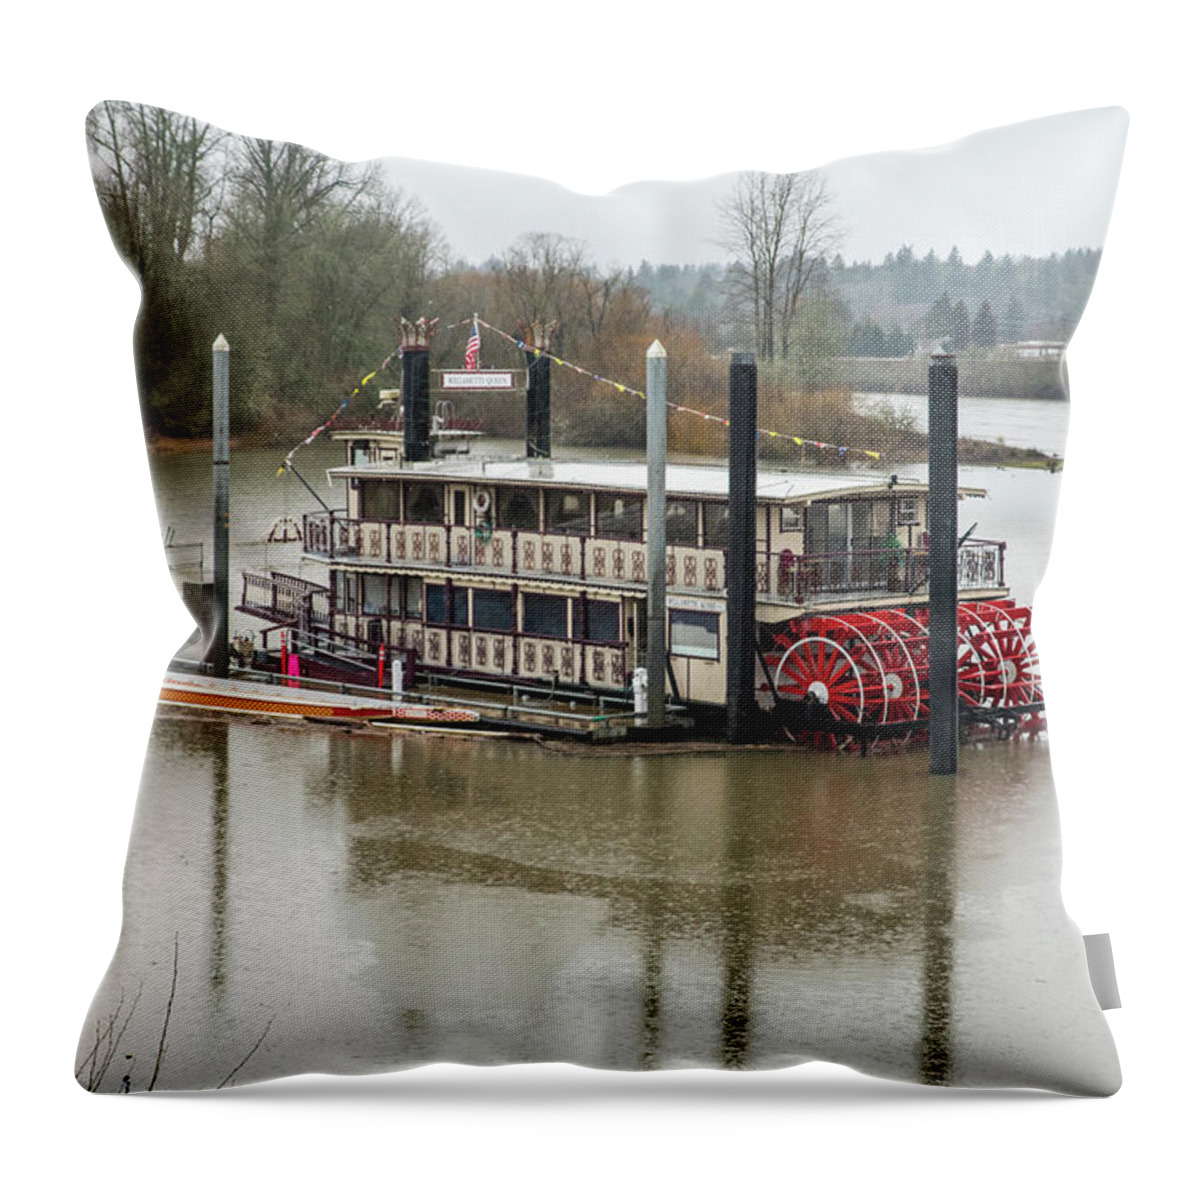 Willamette Queen On A Rainy Day Throw Pillow featuring the photograph Willamette Queen on a Rainy Day by Tom Cochran